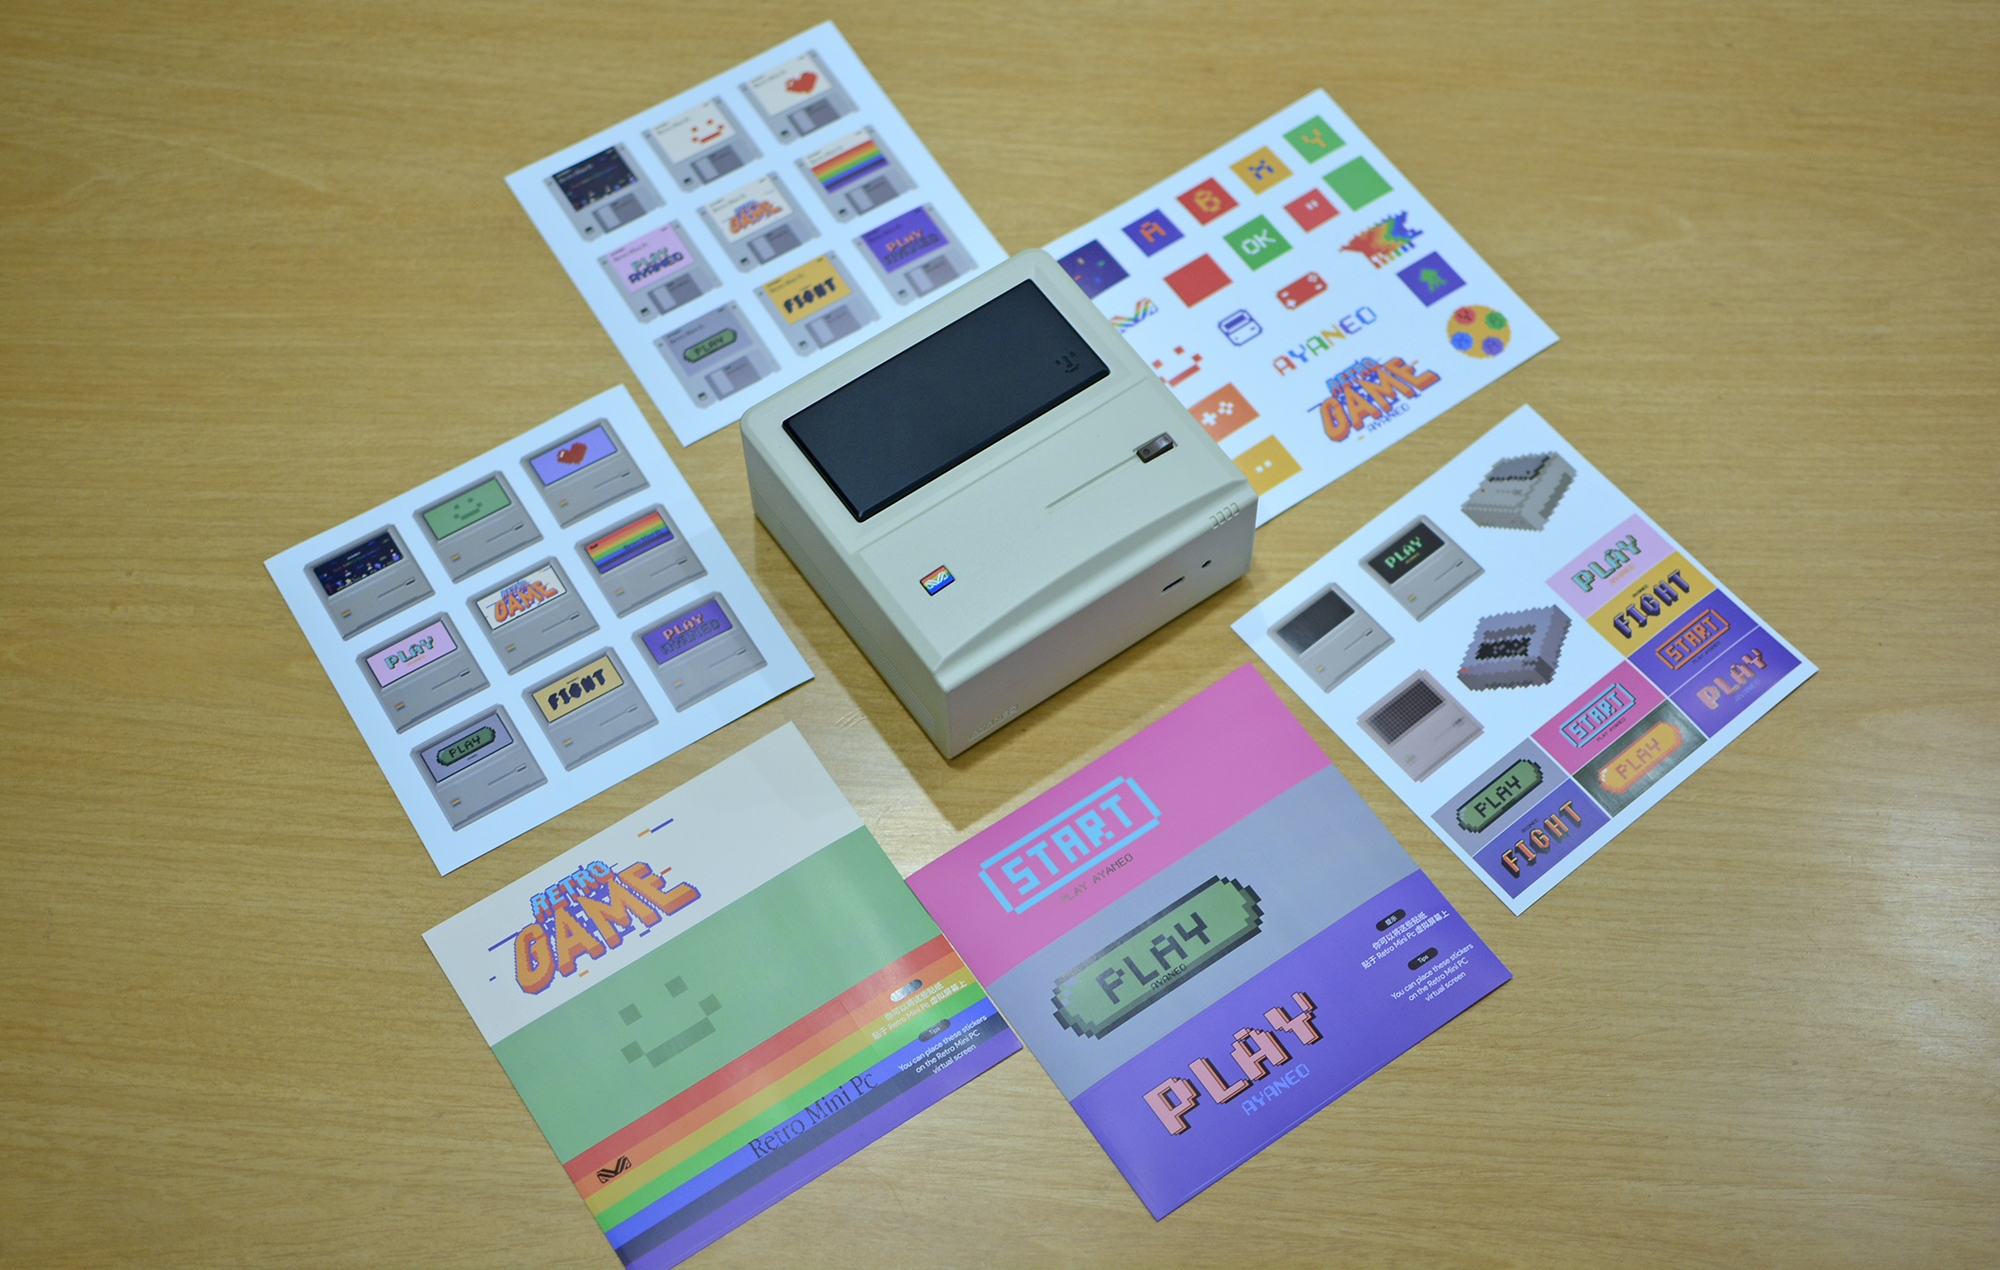 The Ayaneo Retro Mini PC AM01 with all the bundled stickers placed on a desk.